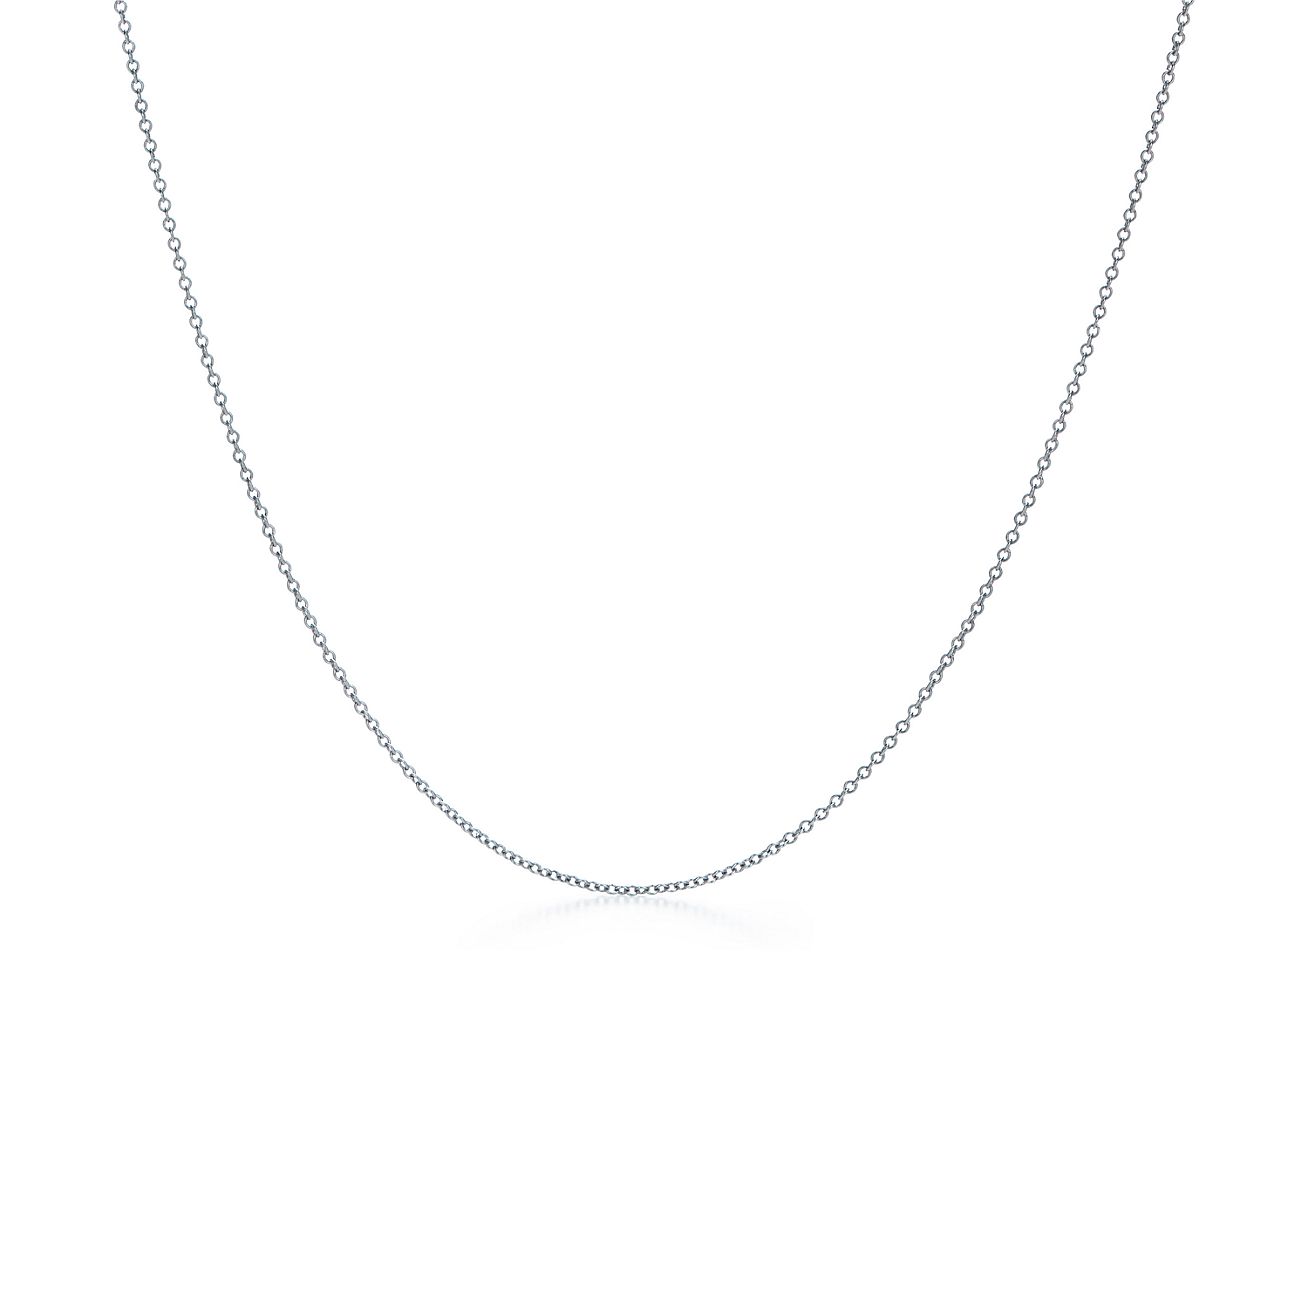 Shop 18ct White Gold Chain Necklace 